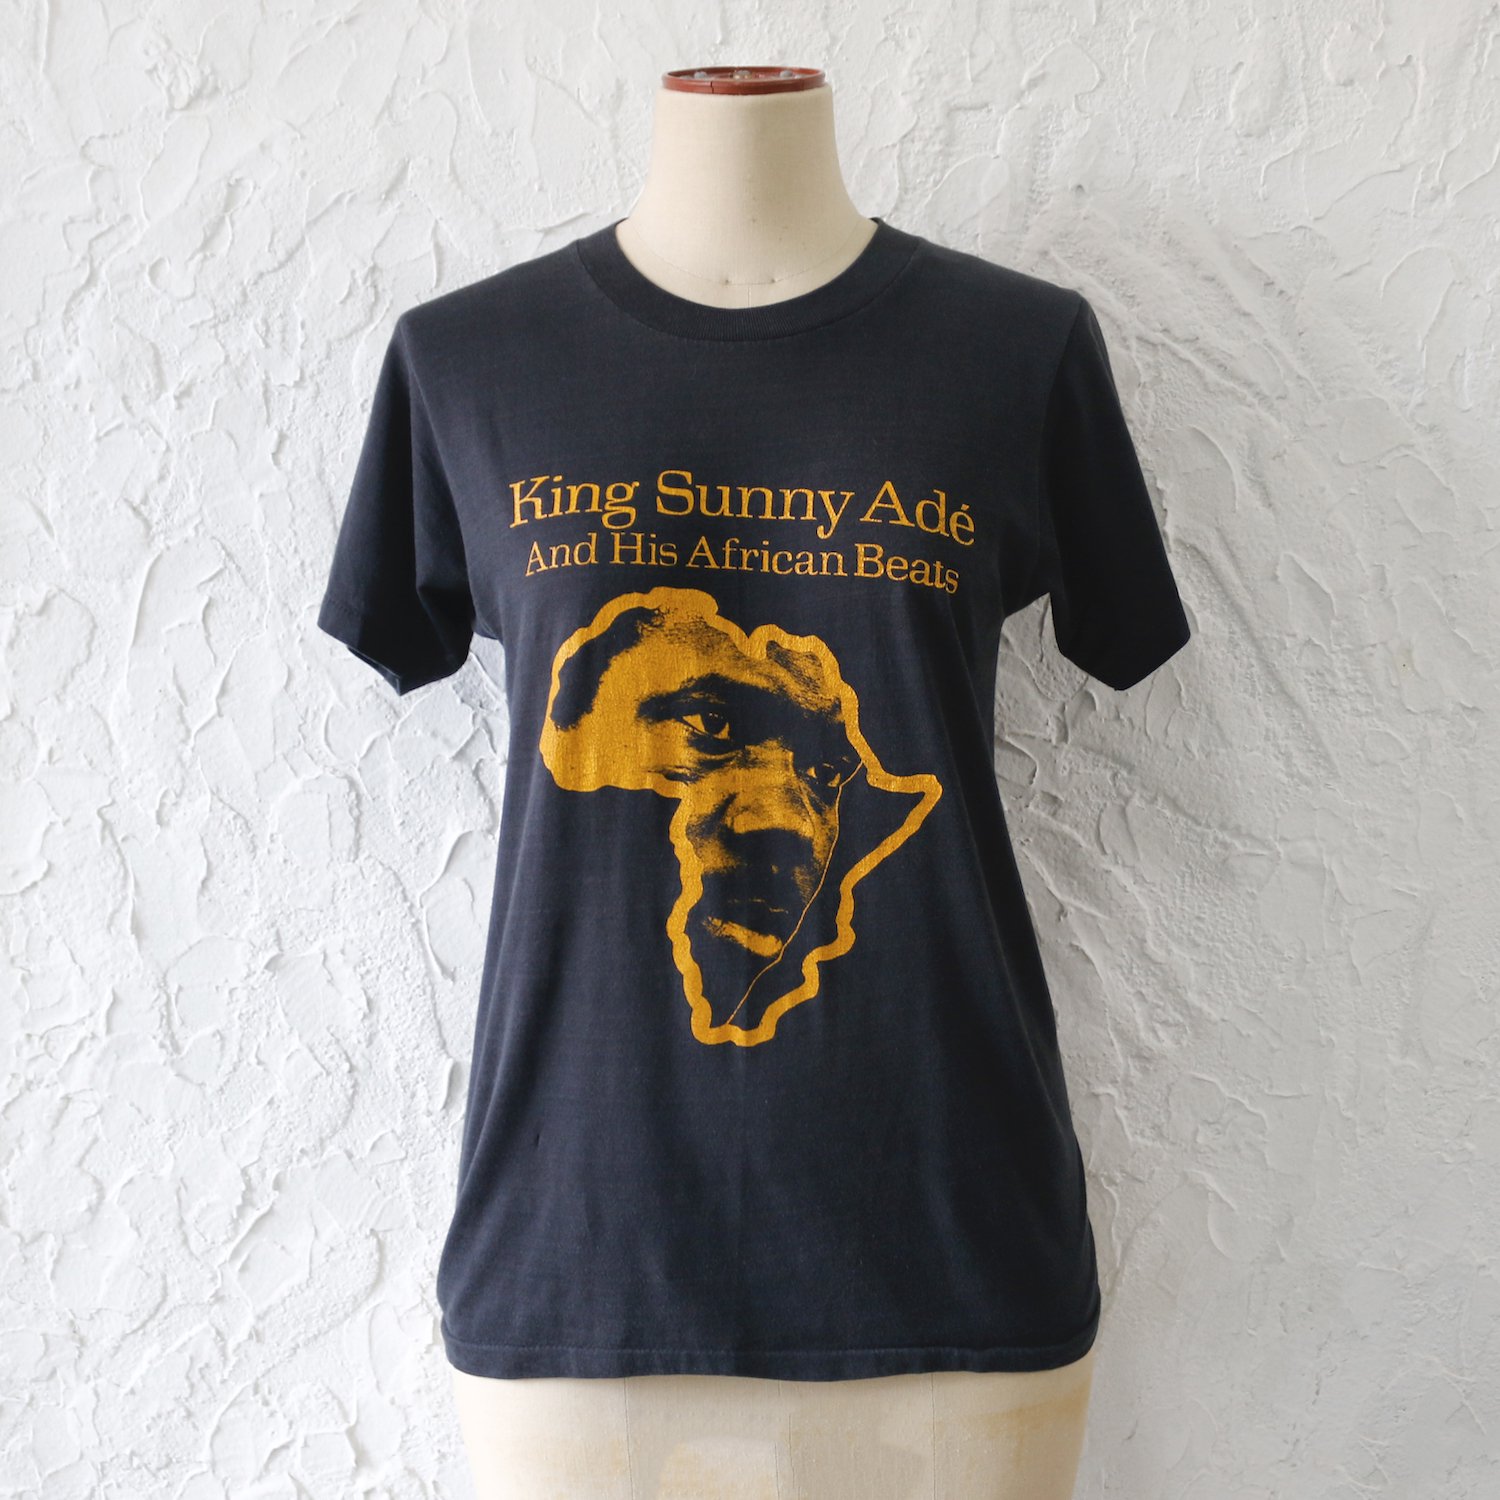 <img class='new_mark_img1' src='https://img.shop-pro.jp/img/new/icons8.gif' style='border:none;display:inline;margin:0px;padding:0px;width:auto;' />Vintage Clothes /70's King Sunny Ade Tee